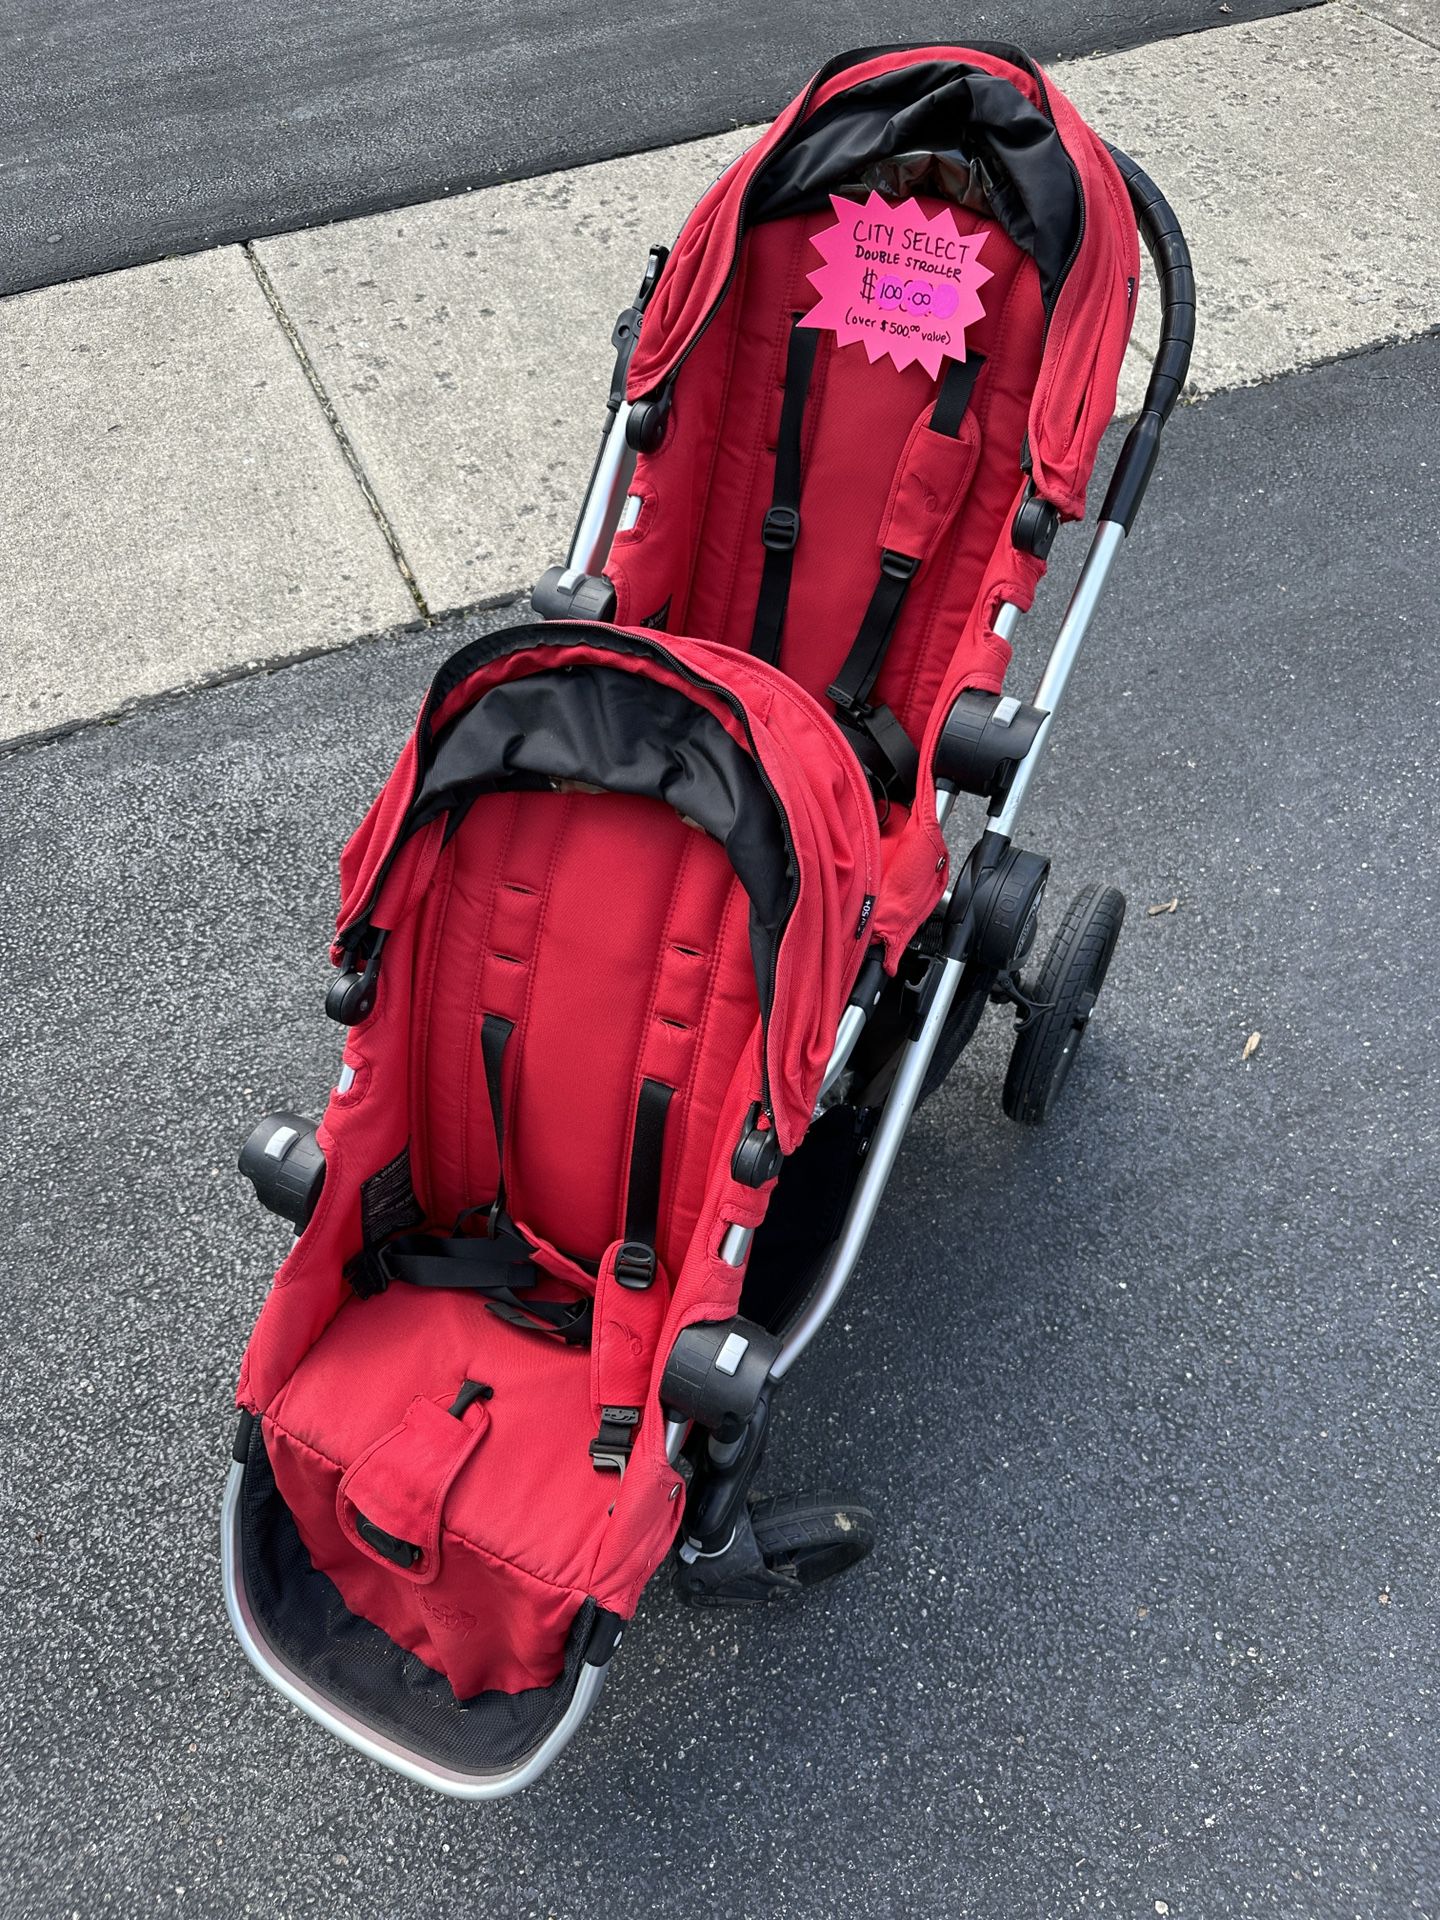 Baby Jogger City Select Stroller